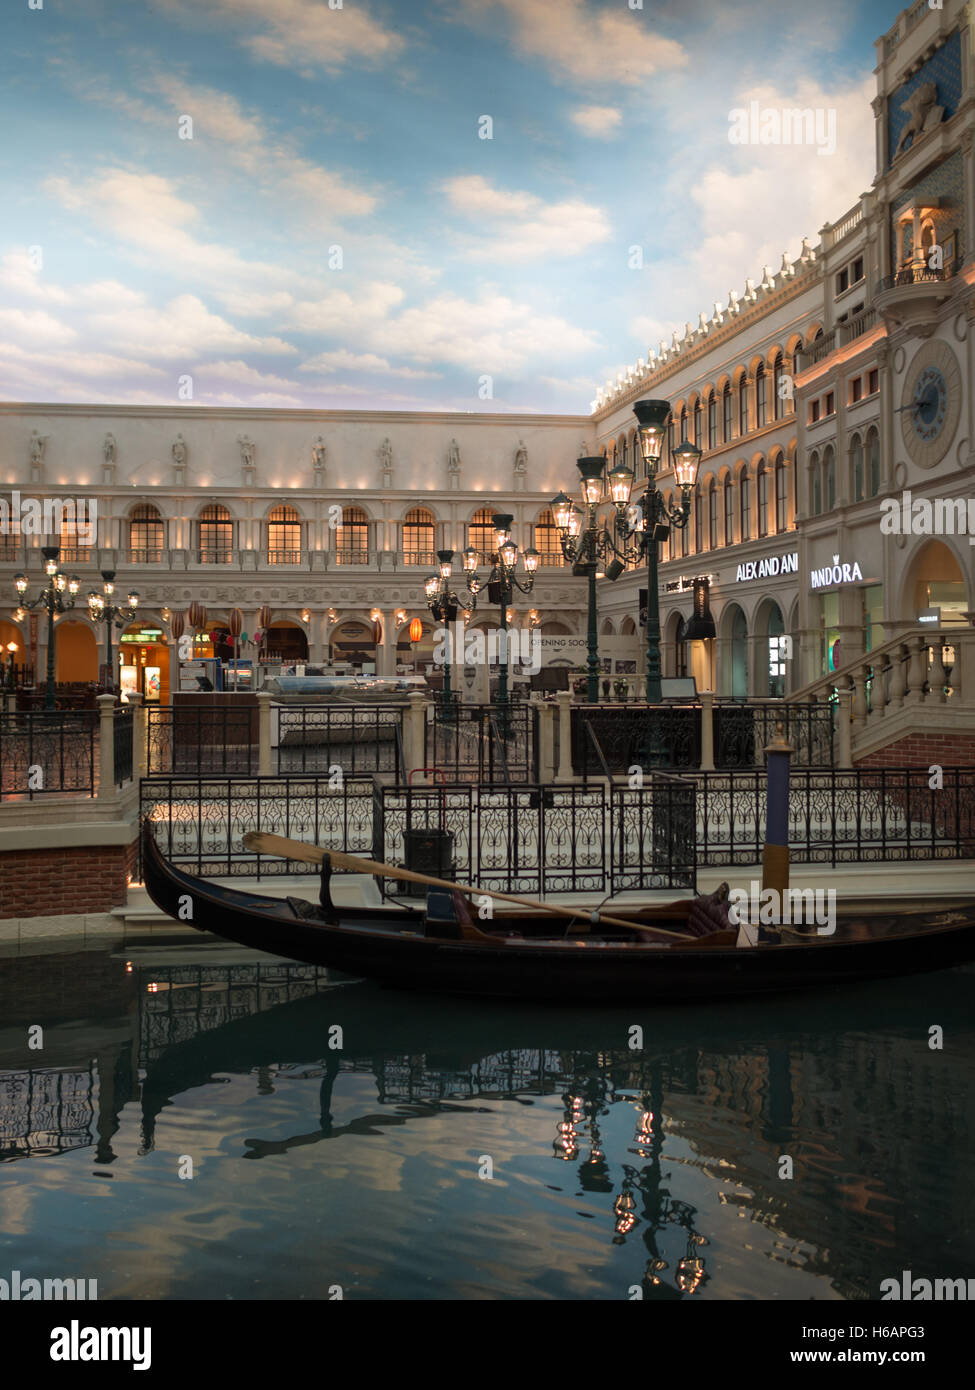 The canal inside The Venetian Stock Photo